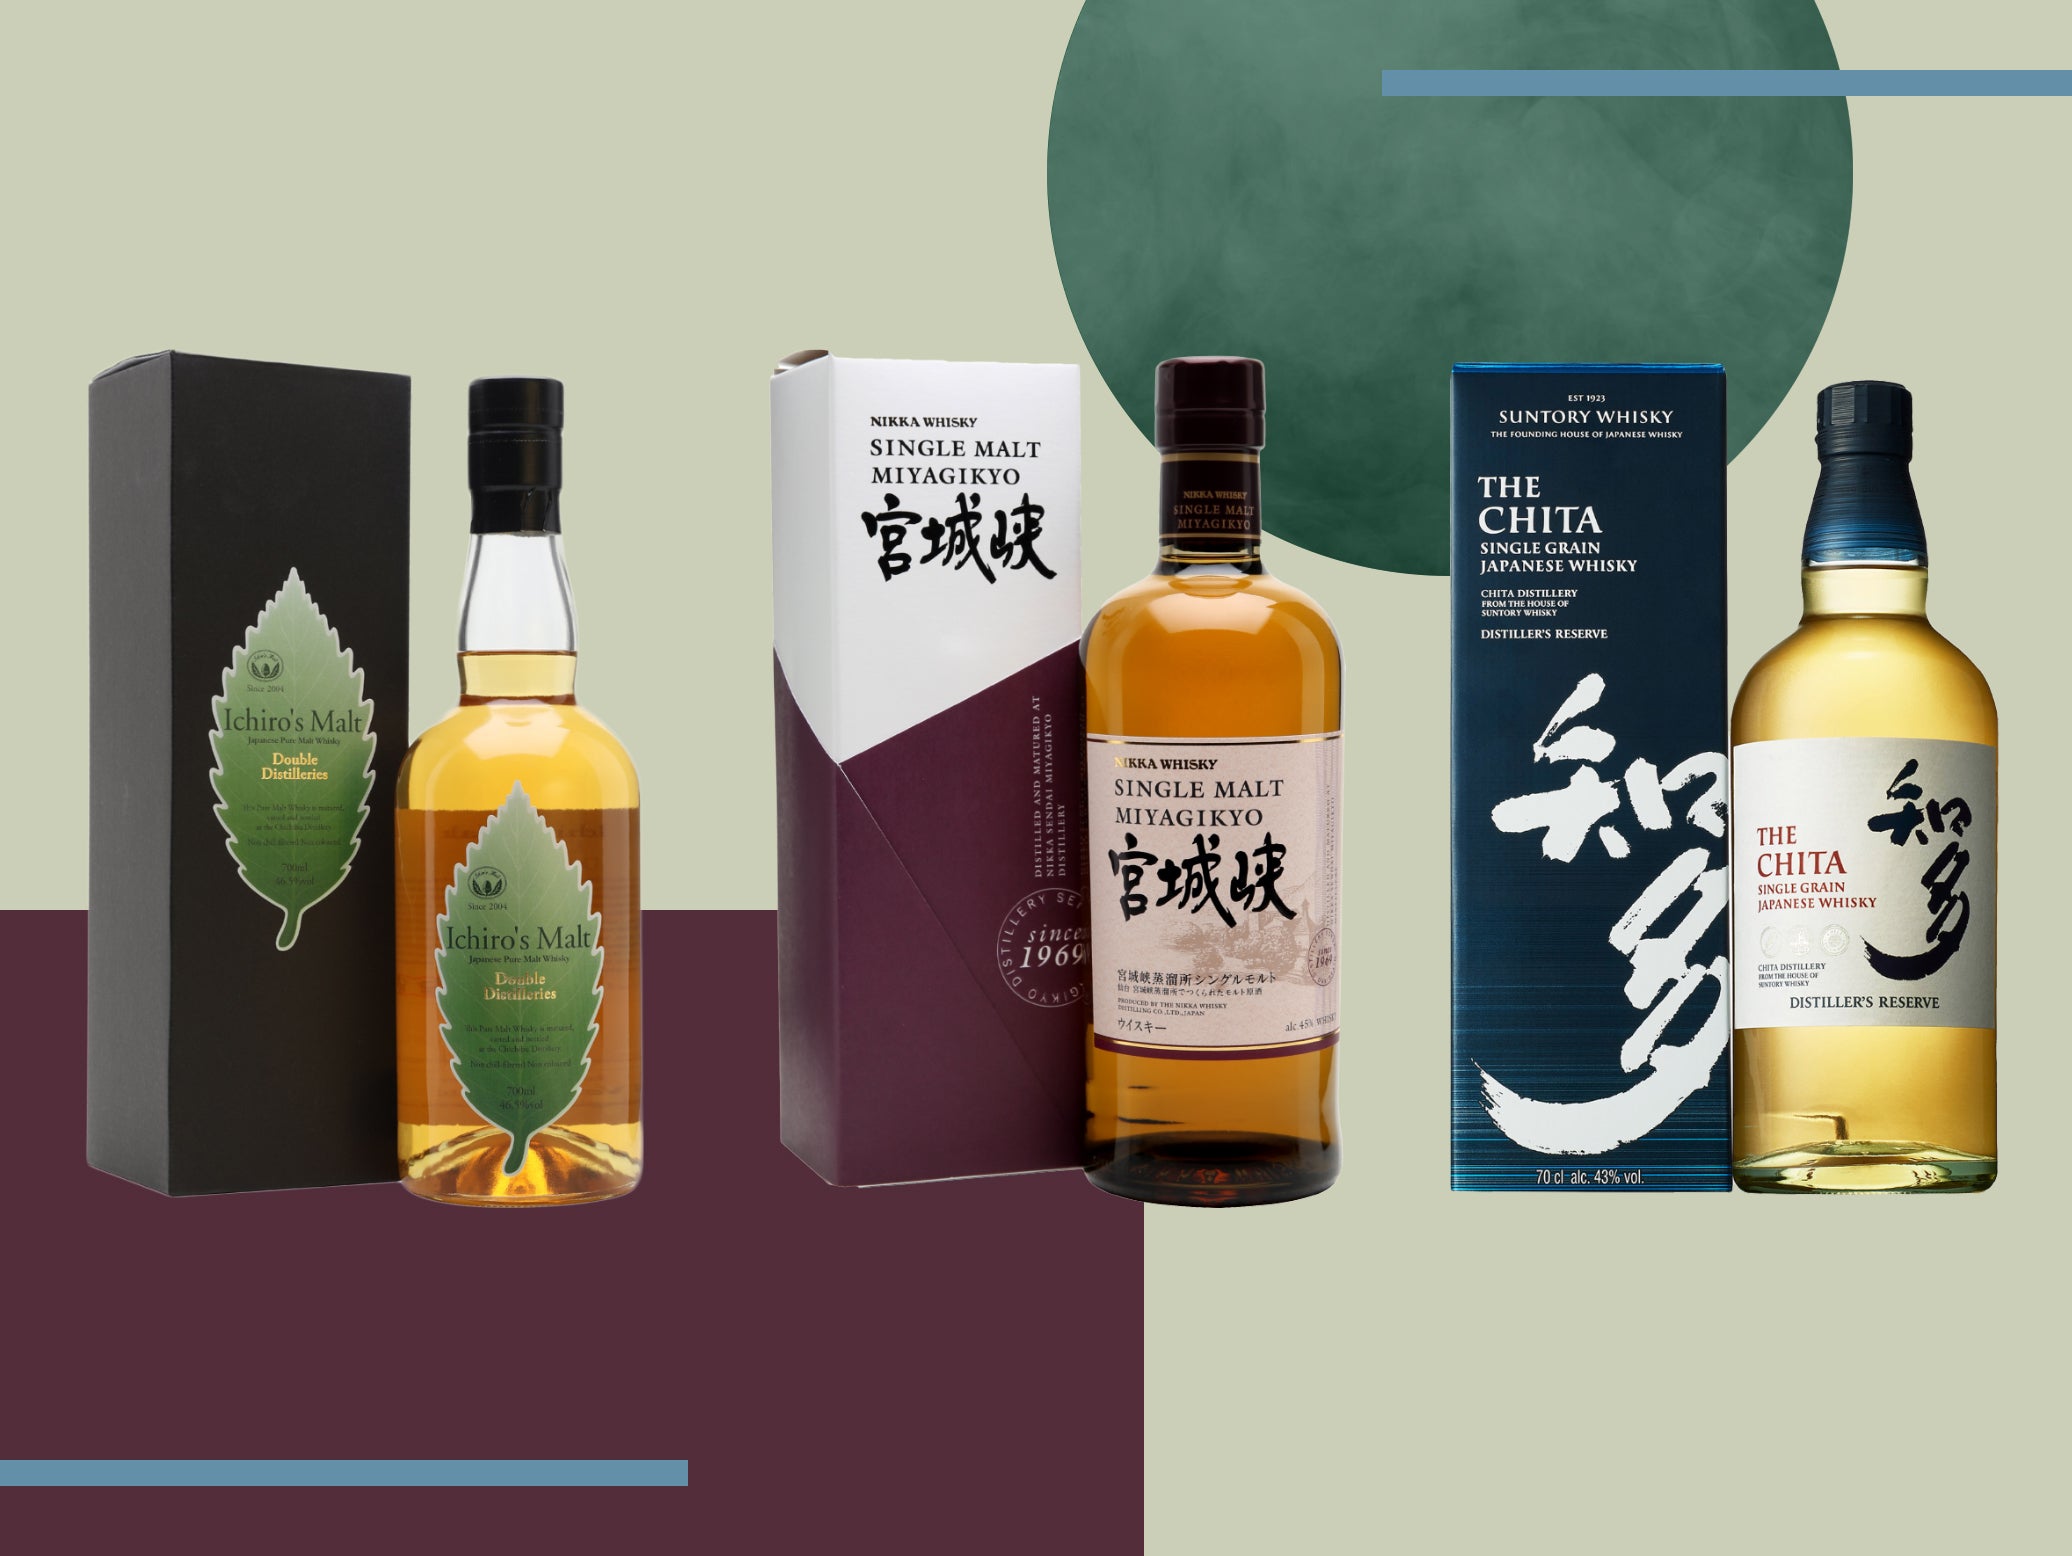 The best Japanese whiskies for experts and newbies alike